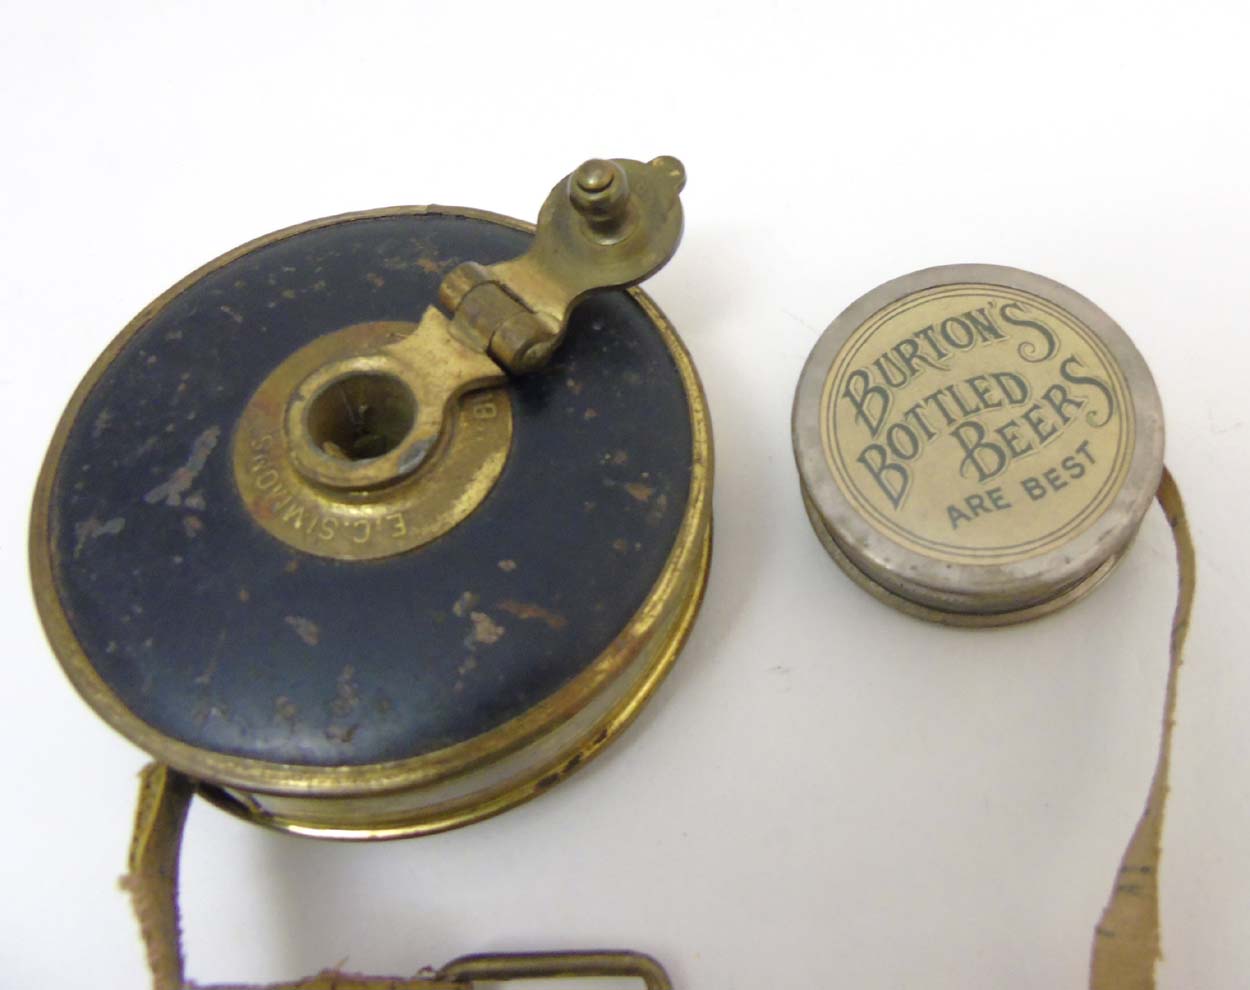 E C Simmons : ' Blue Brand ' brass tape measure together with an advertising sewing tape measure - Image 4 of 5